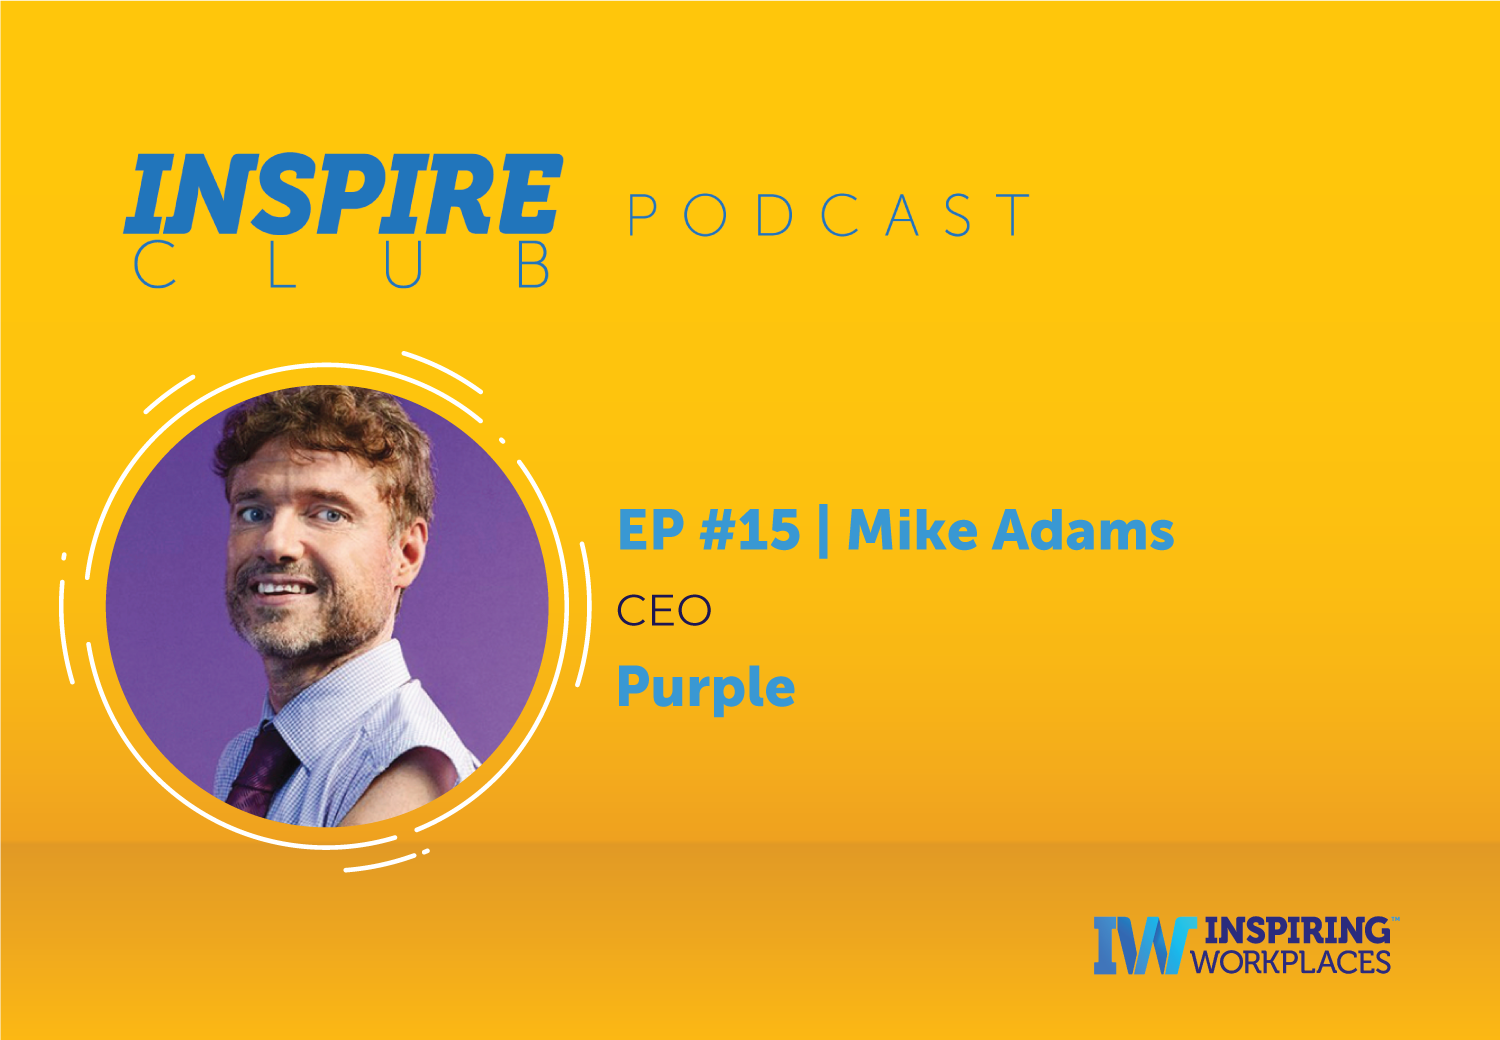 Inspire Club Podcast: EP #15 &#8211; Mike Adams